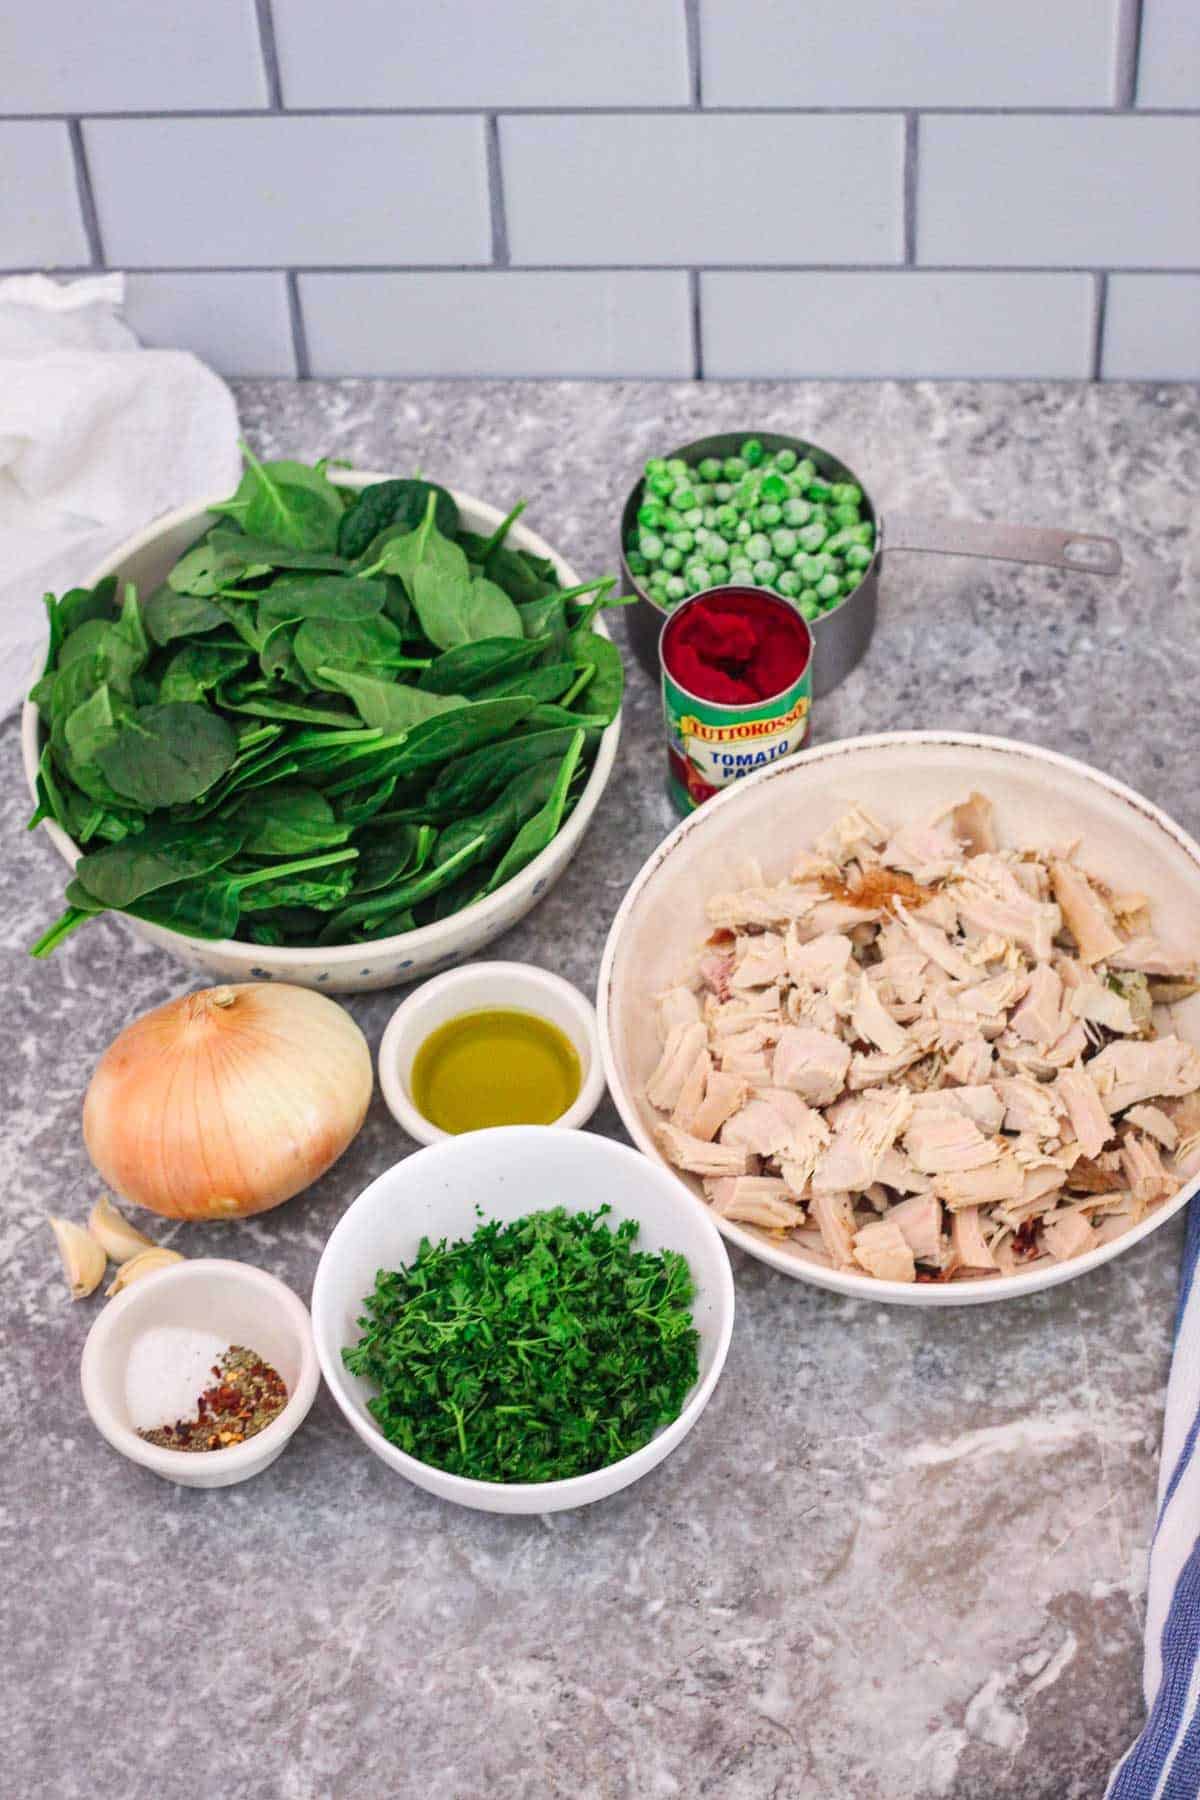 Some of the ingredients shown next to each other: spinach, tomato paste, green peas, onion, olive oil, turkey meat, garlic, fresh parsley and a little container with salt, spices and herbs.